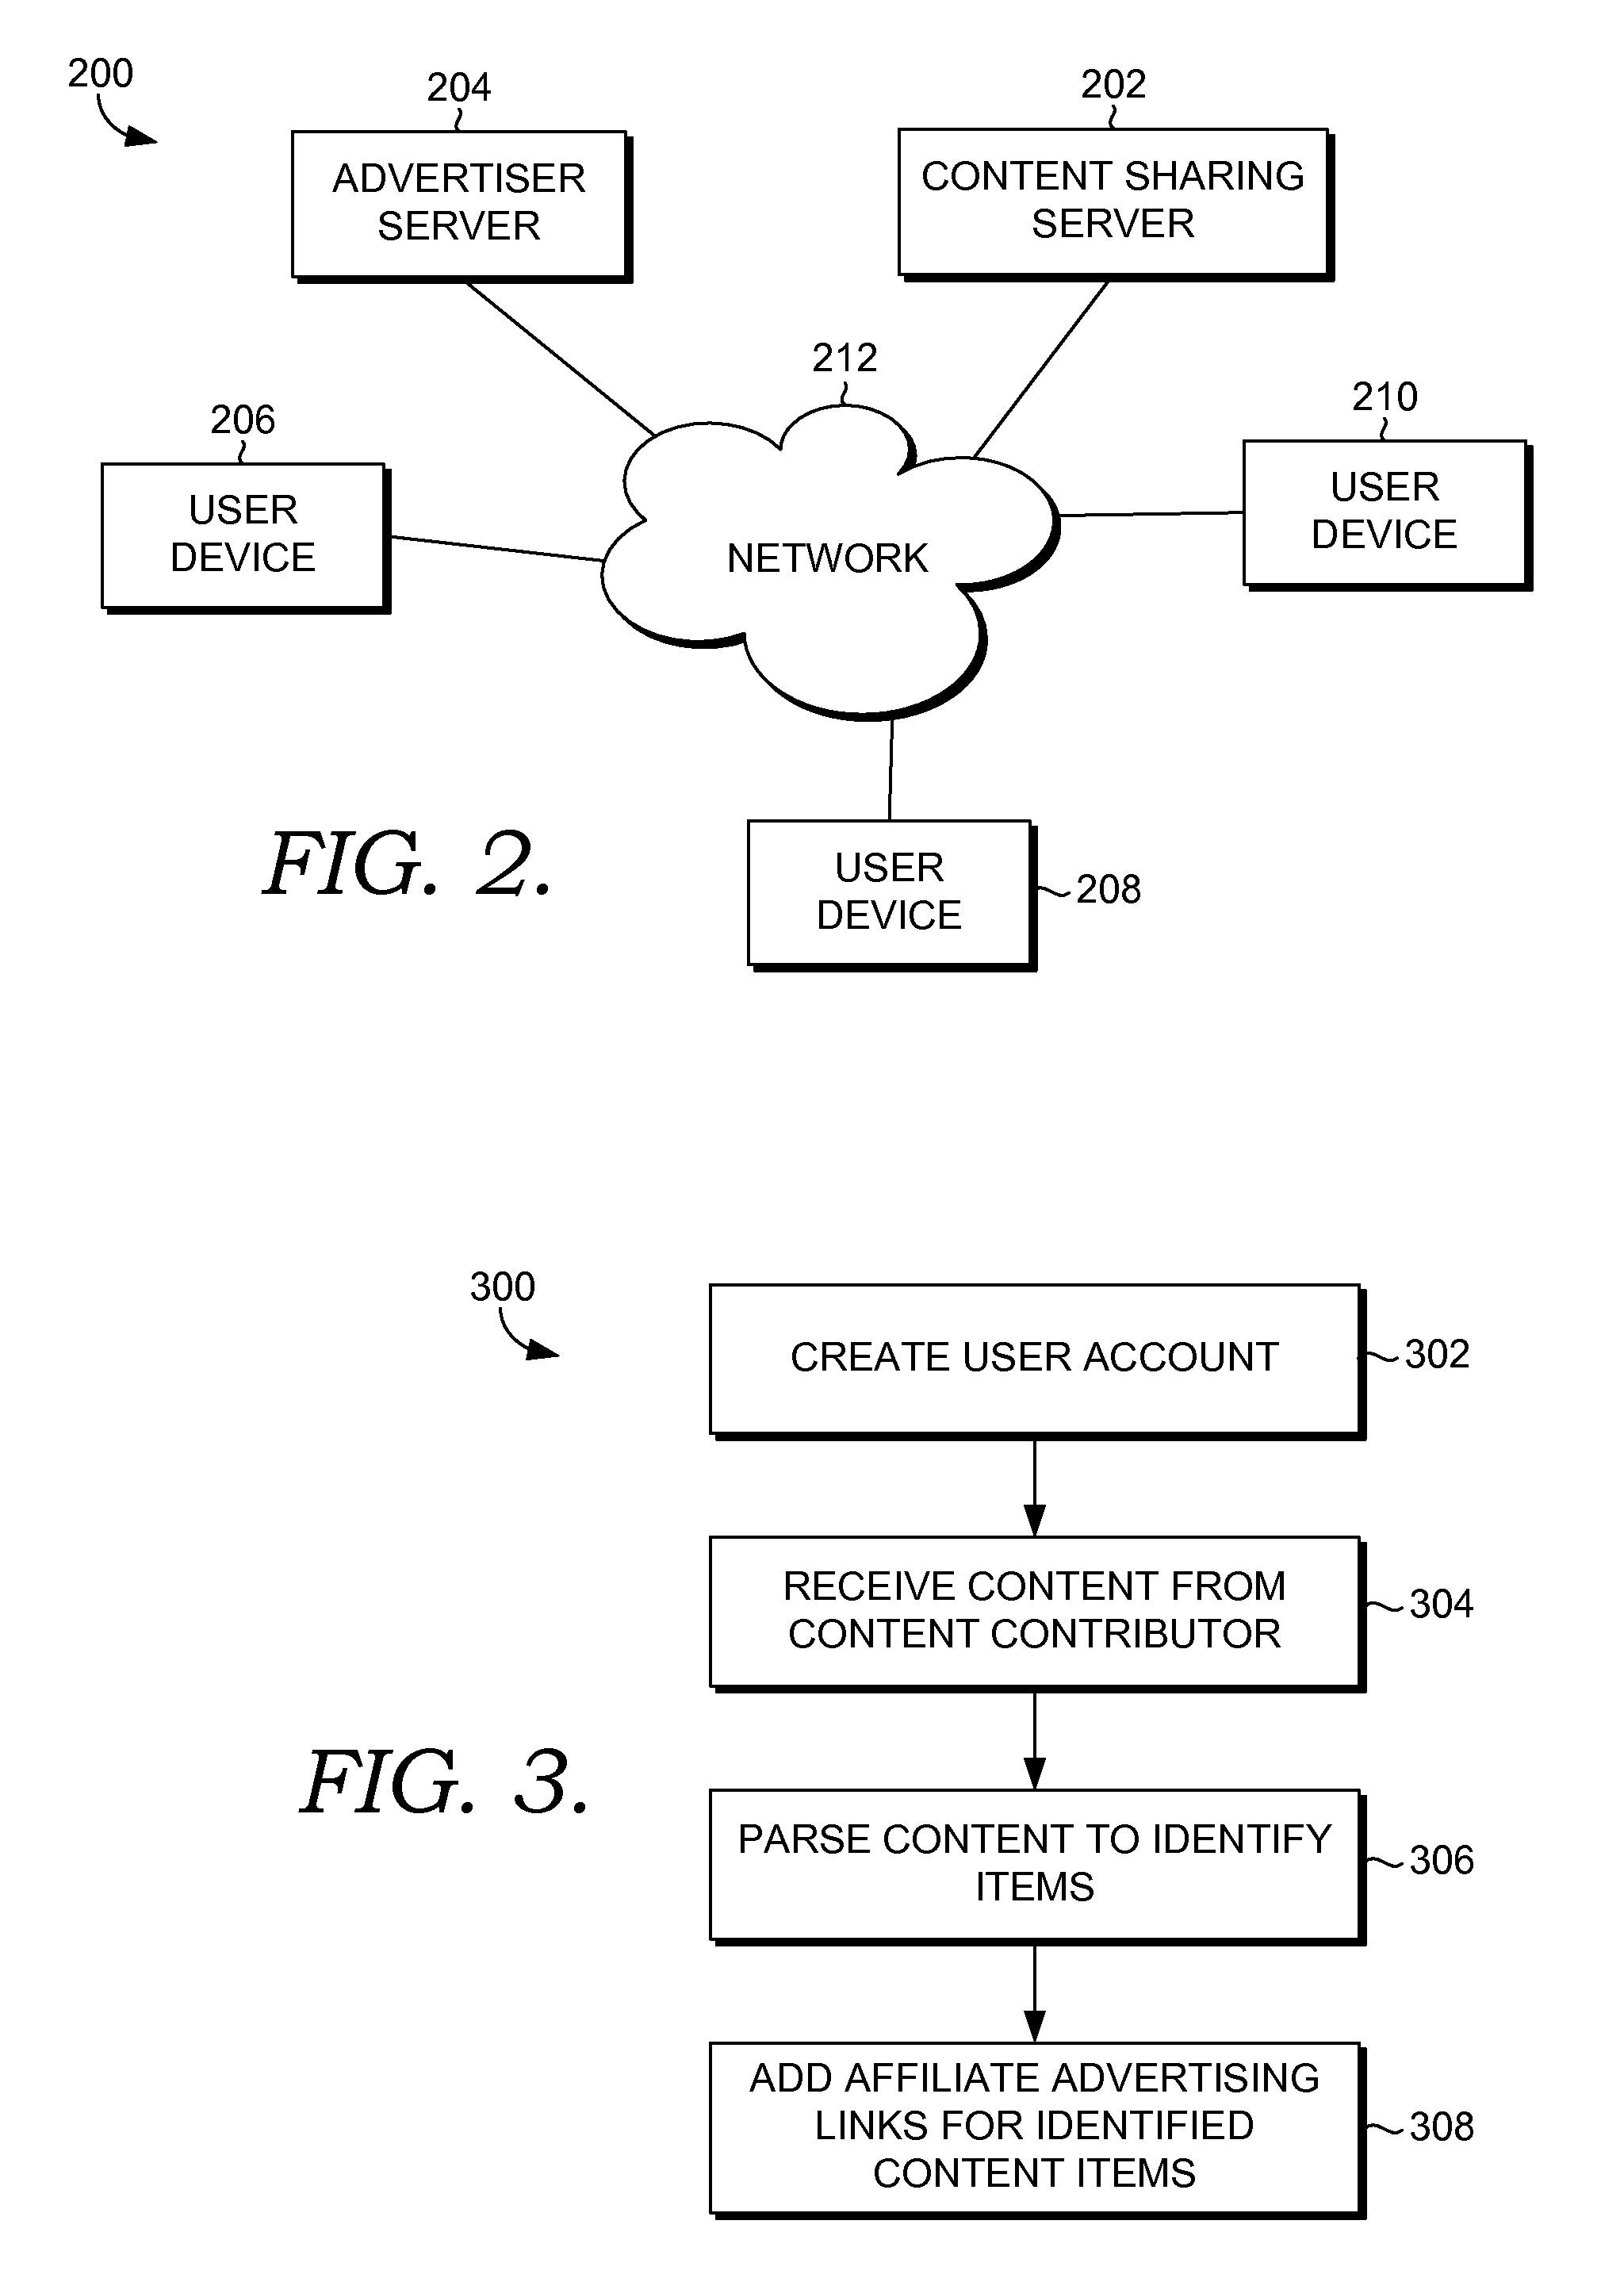 Revenue Generation and Sharing for Content Sharing Services